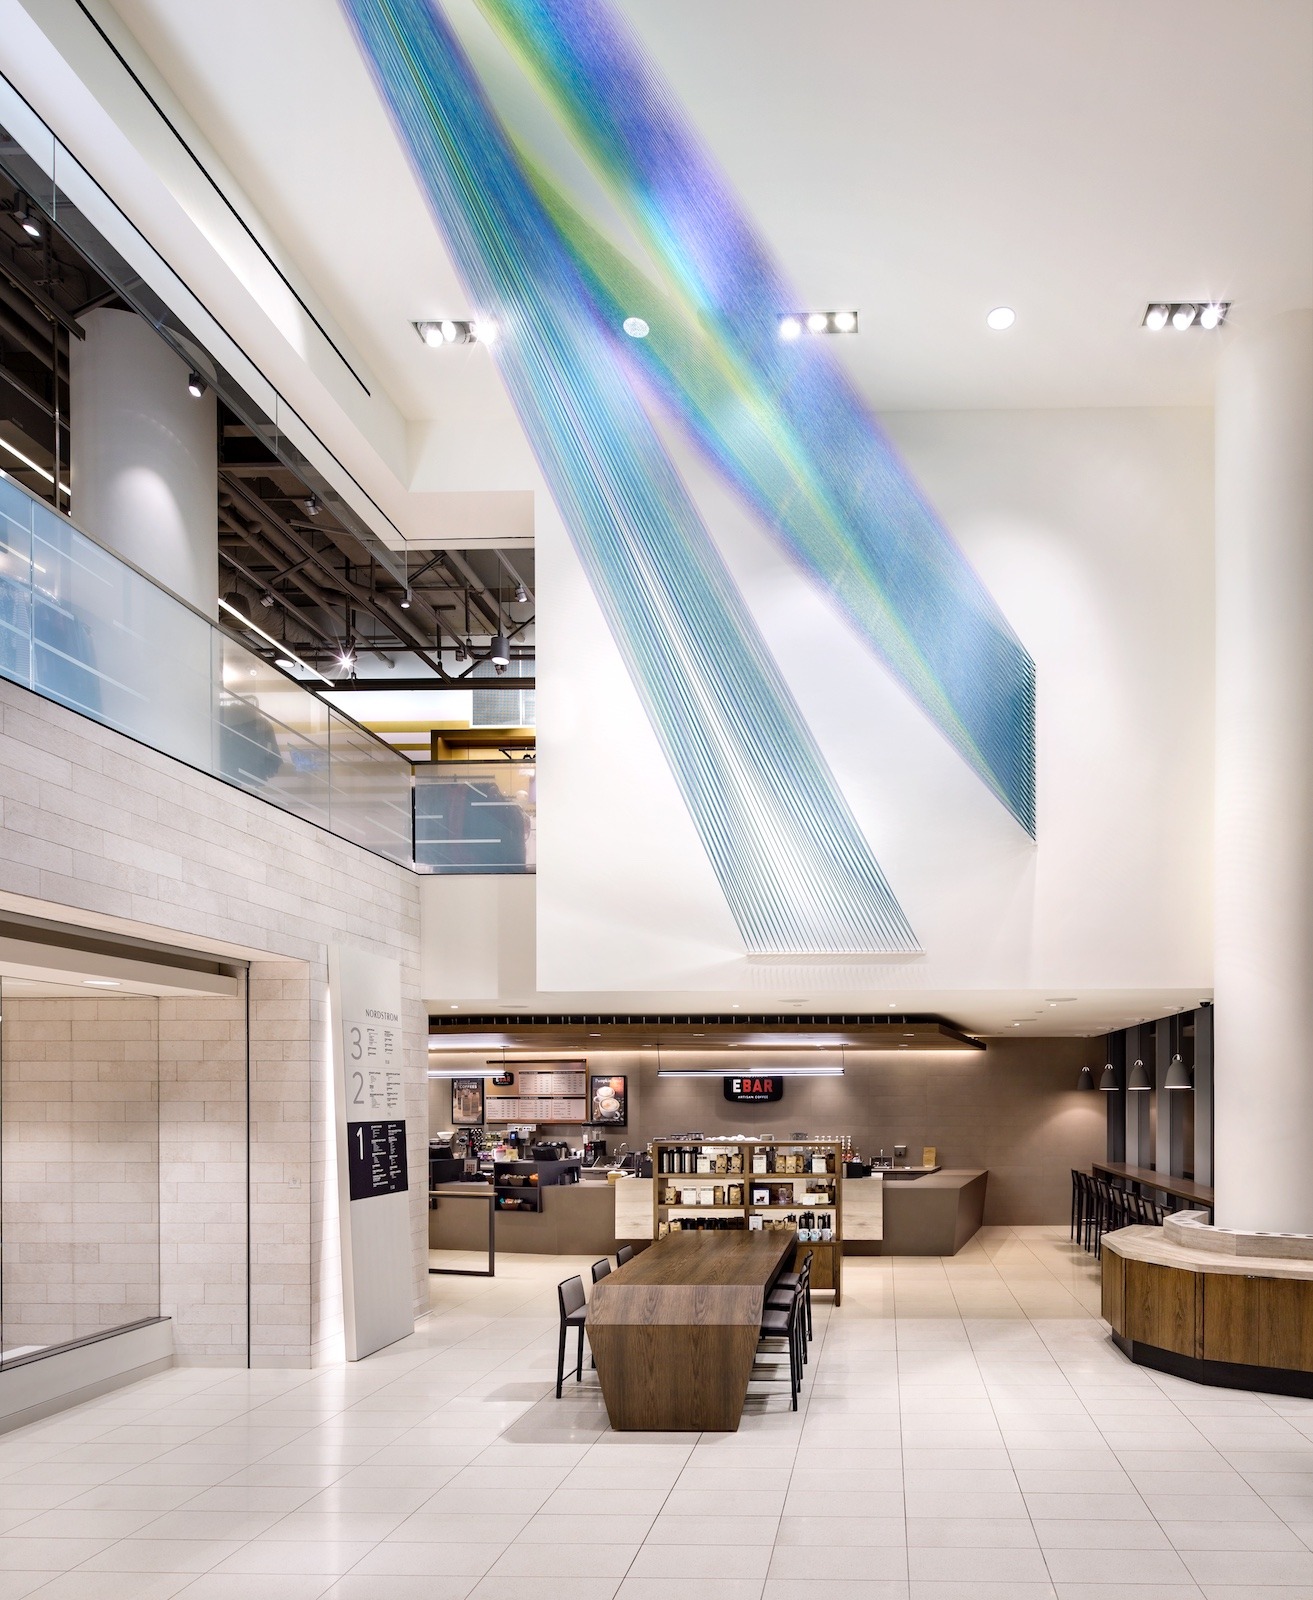 Robertson-Walls-Ceilings-Completed-Projects-Luxury-Retail-Nordstrom-Vancouver-4 NORDSTROM, VANCOUVER